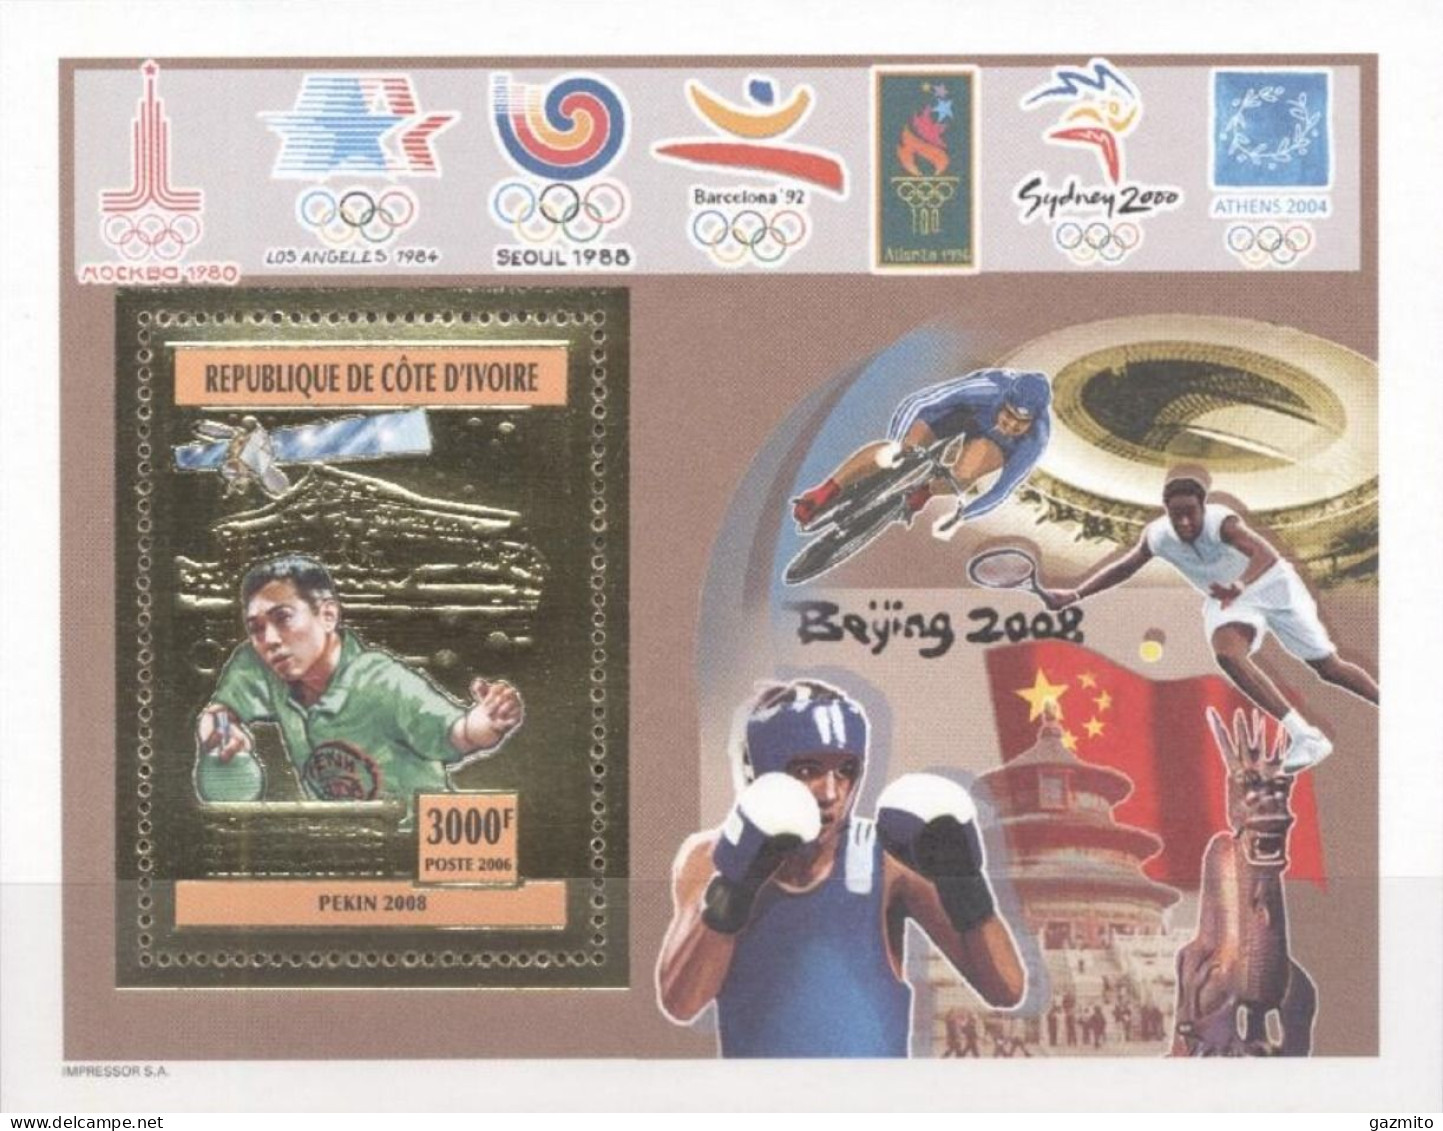 Ivory Coast 2005, Olympic Games Benjing, Tennis Table, Cyclism, Tennis, Boxing, Space, BF GOLD - Côte D'Ivoire (1960-...)